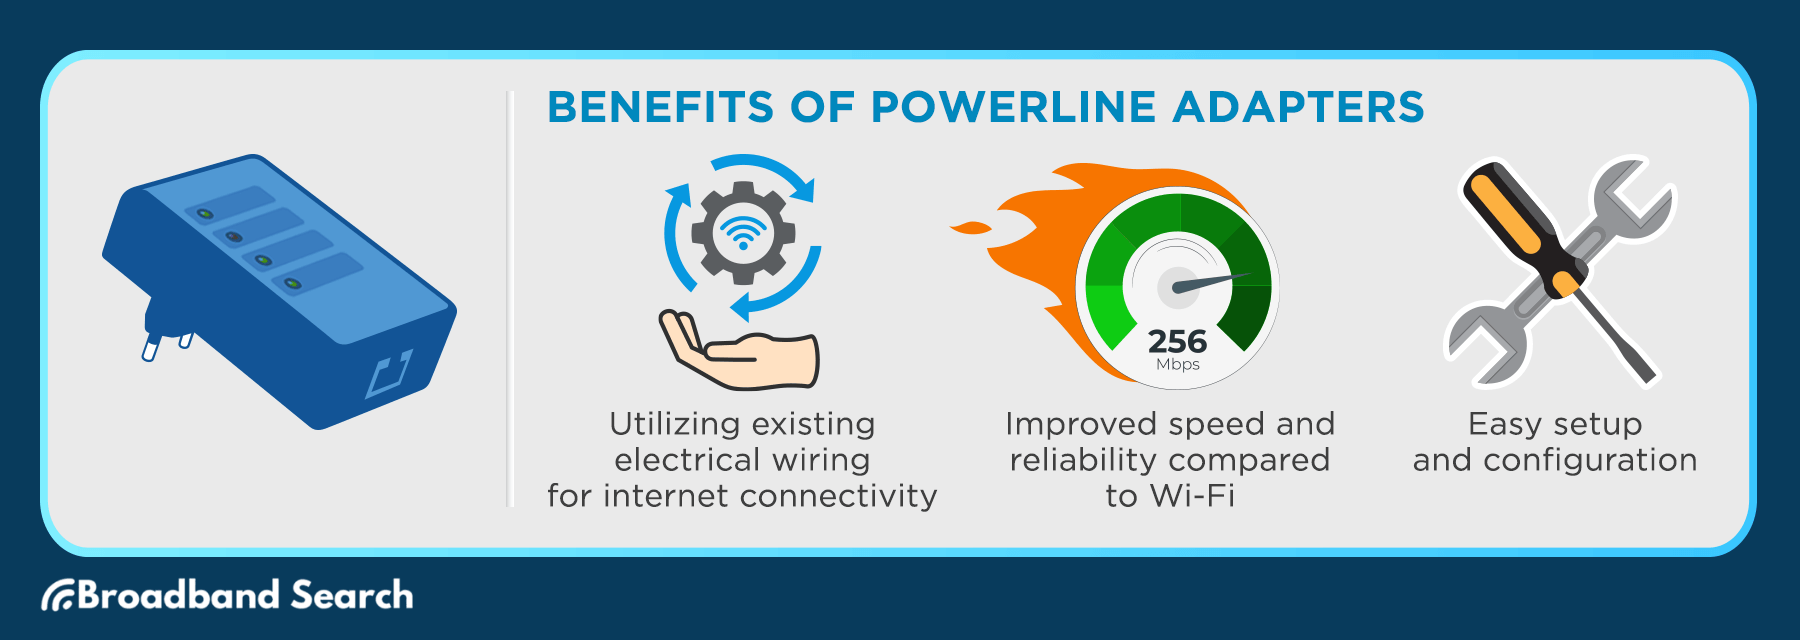 Graphic showing the benefits of Powerline Adapters